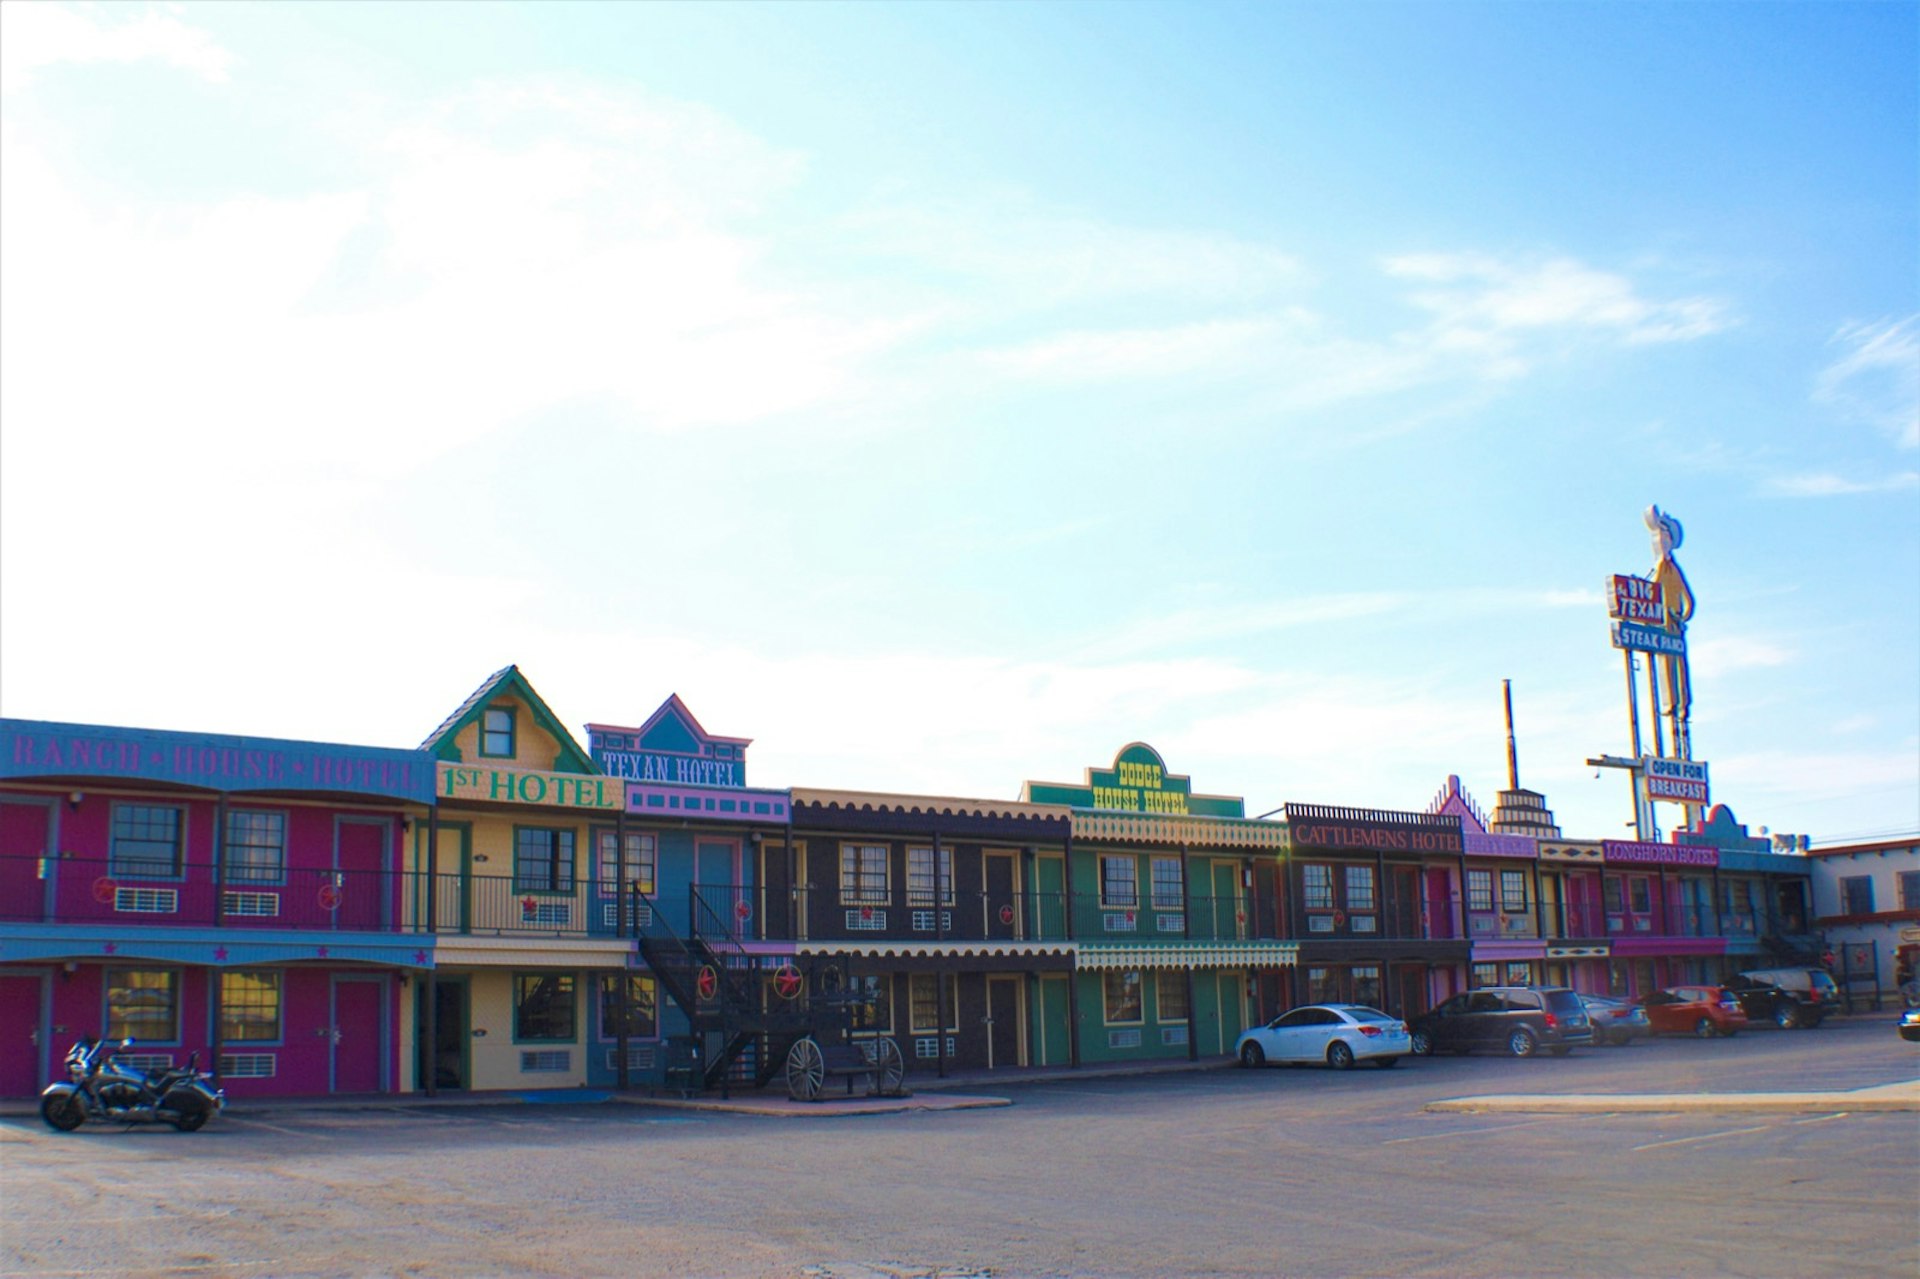 Exterior of the Big Texan, made up to look like an Old West town with brightly colored facades